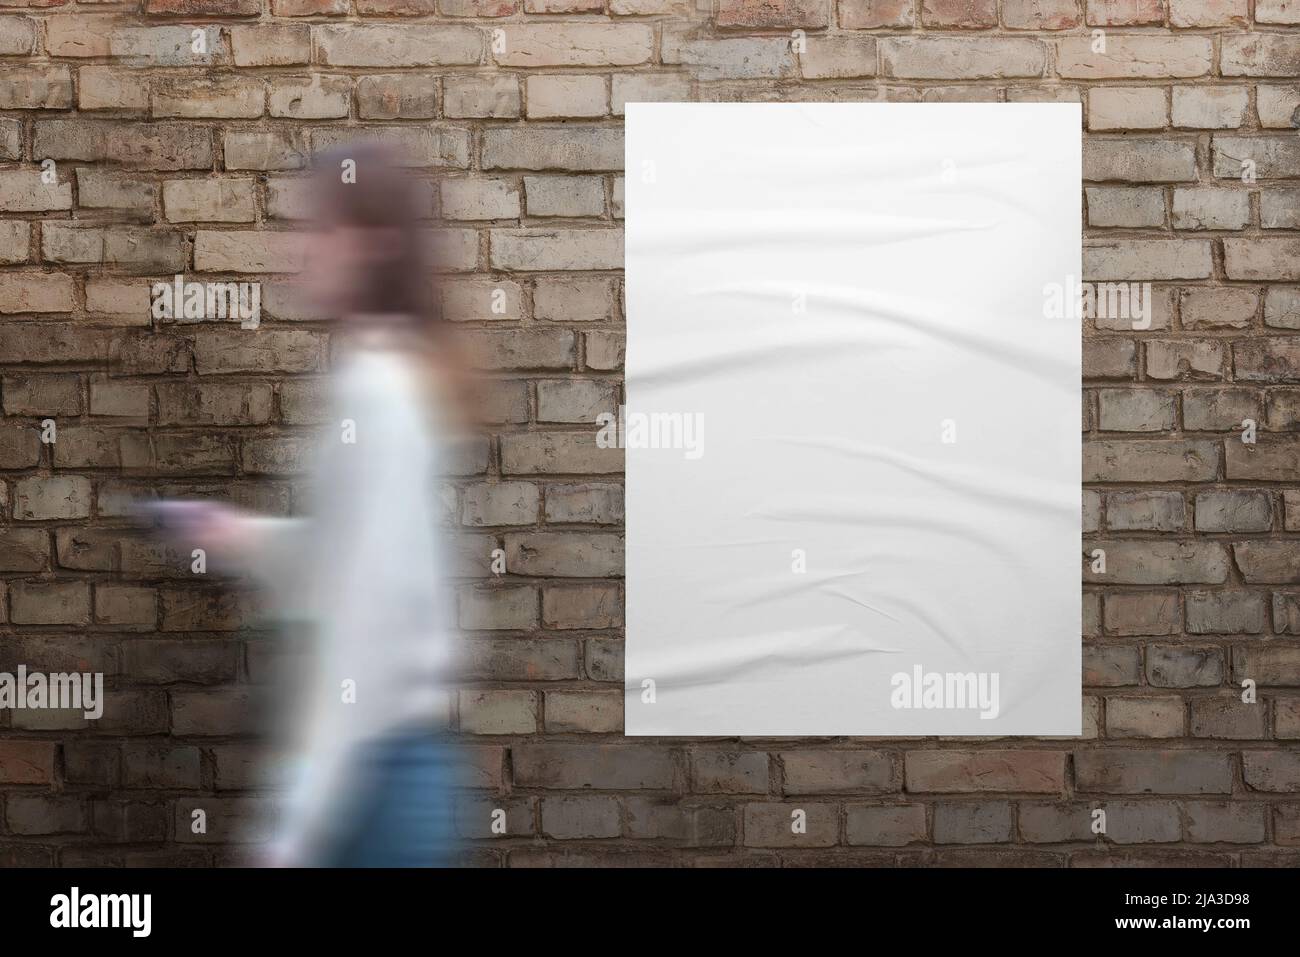 Girl walks past a white poster on brick street wall. Blank white poster with crumpled texture for design presentation Stock Photo